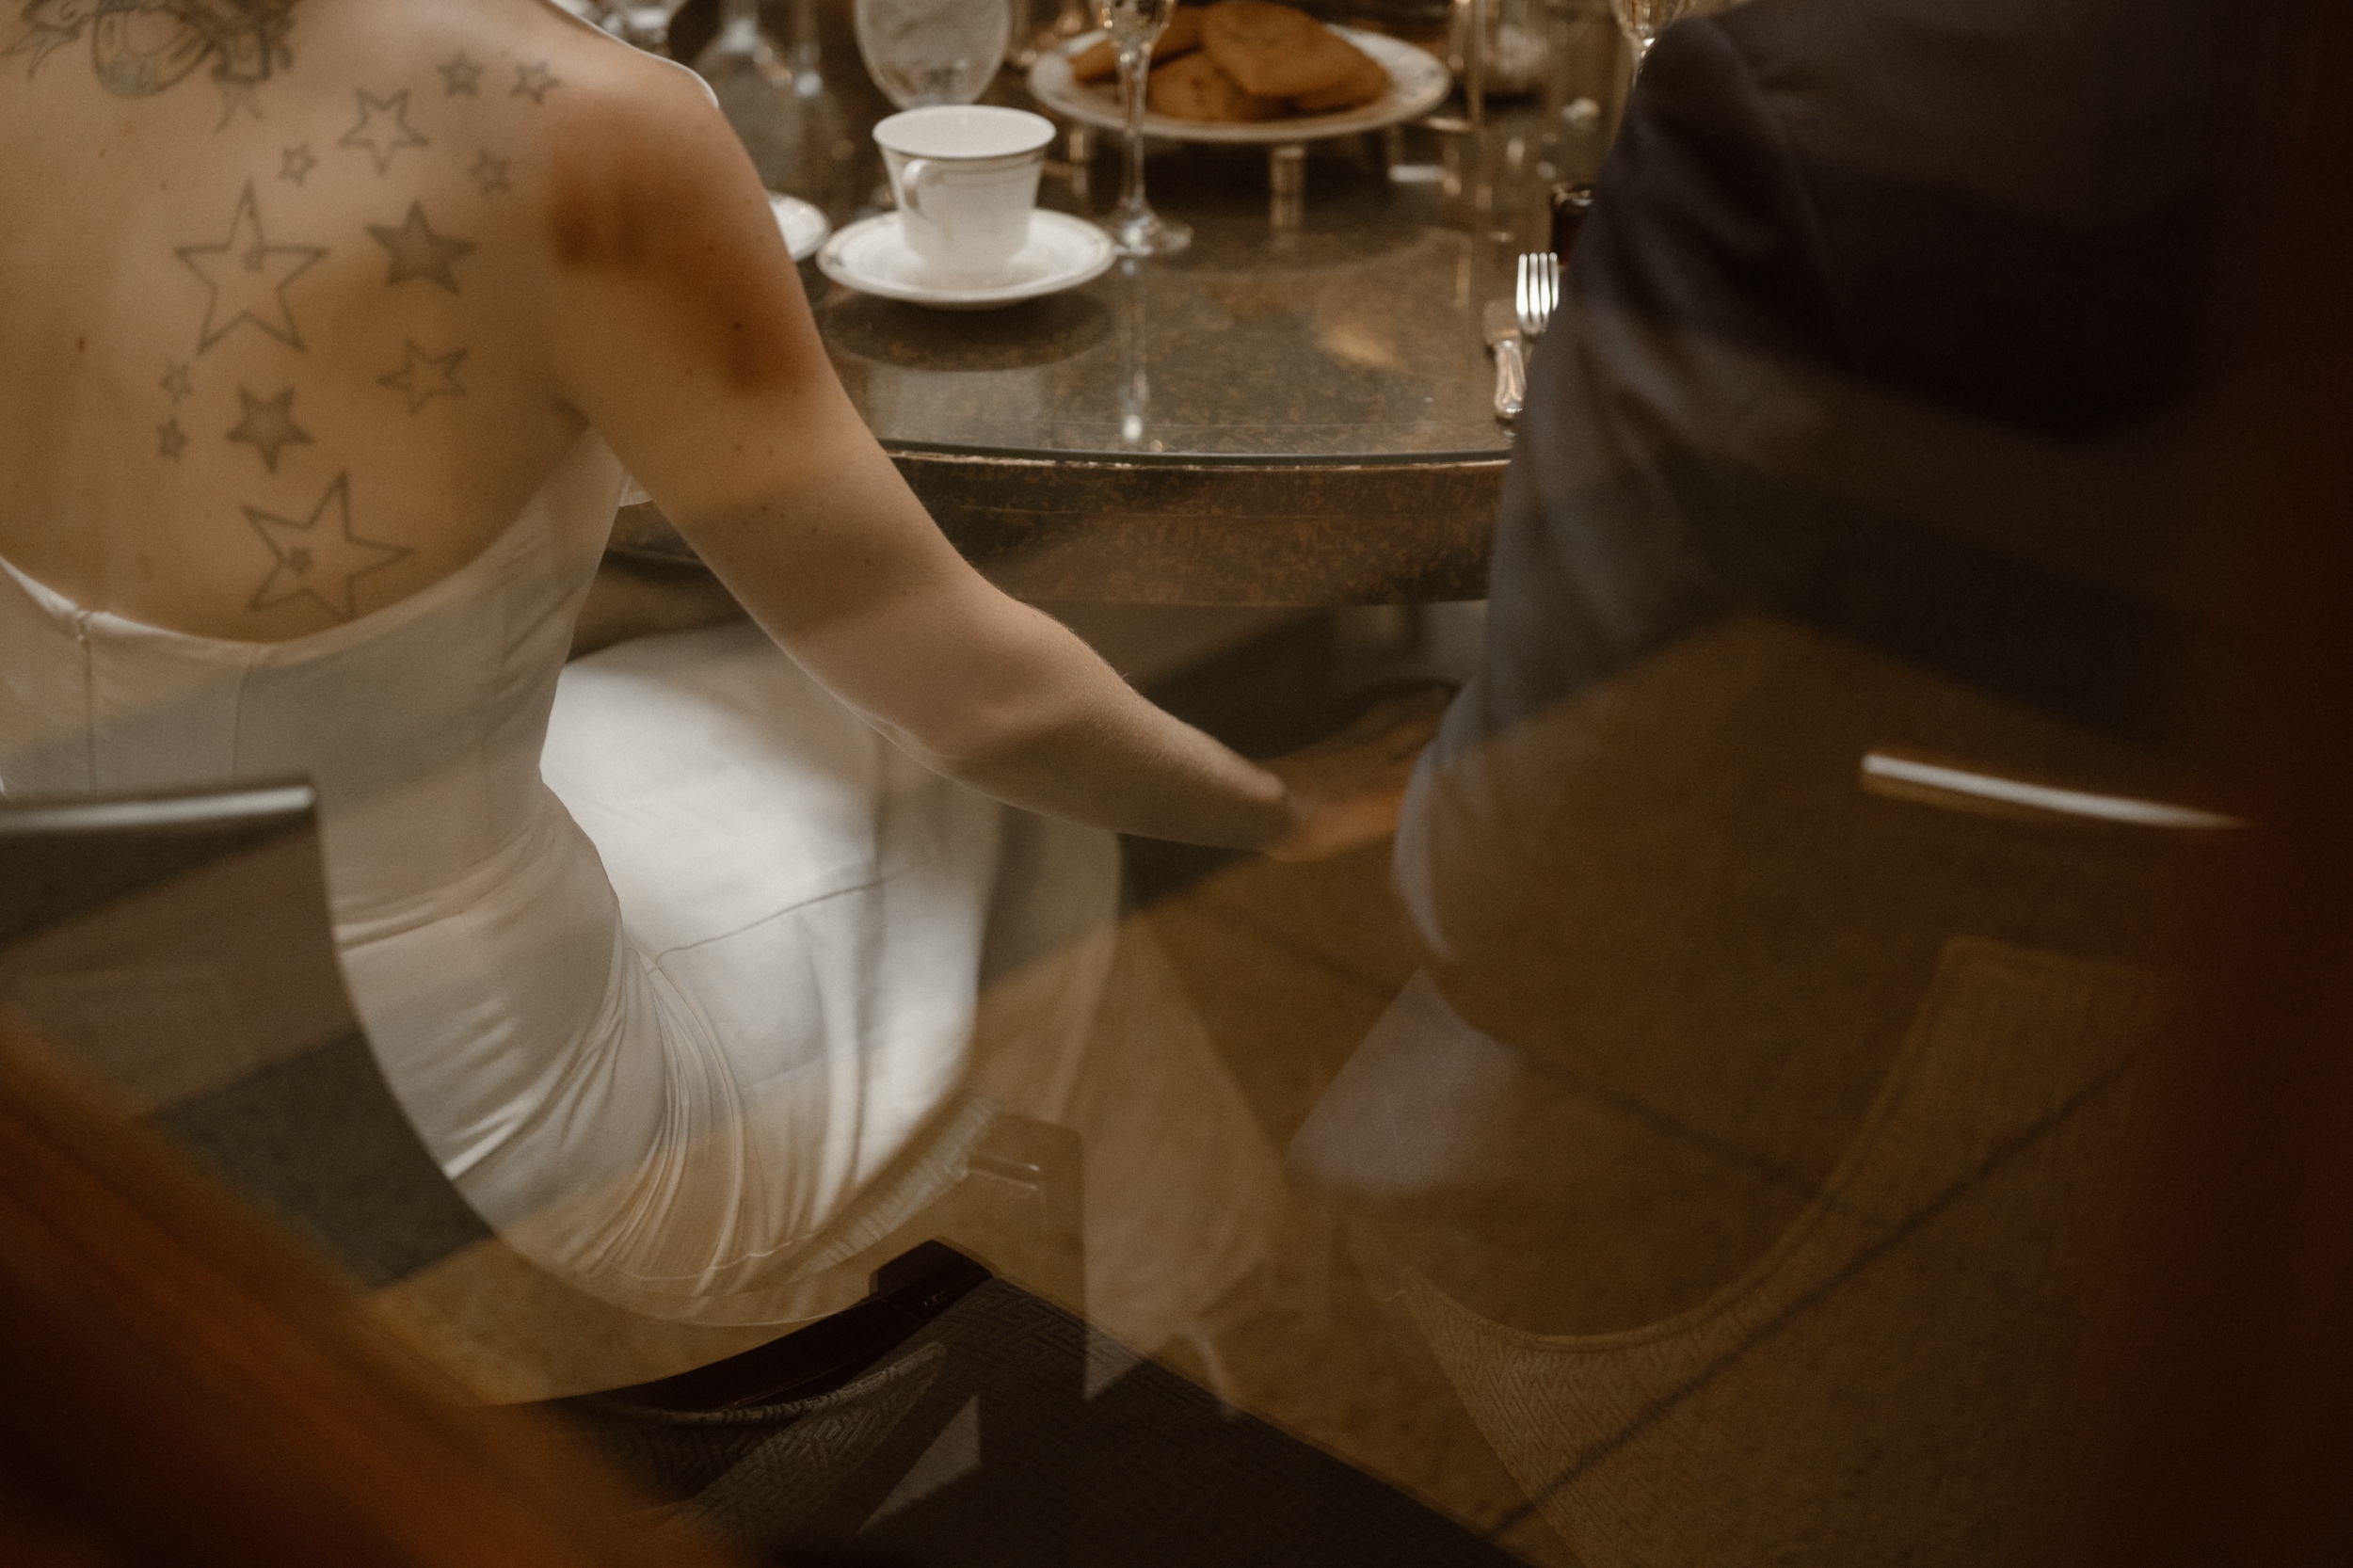 A bride and groom hold hands under the table at their high tea reception at the Brown Palace in Denver, Colorado. Photo by Denver wedding photographer Ashley Joyce.